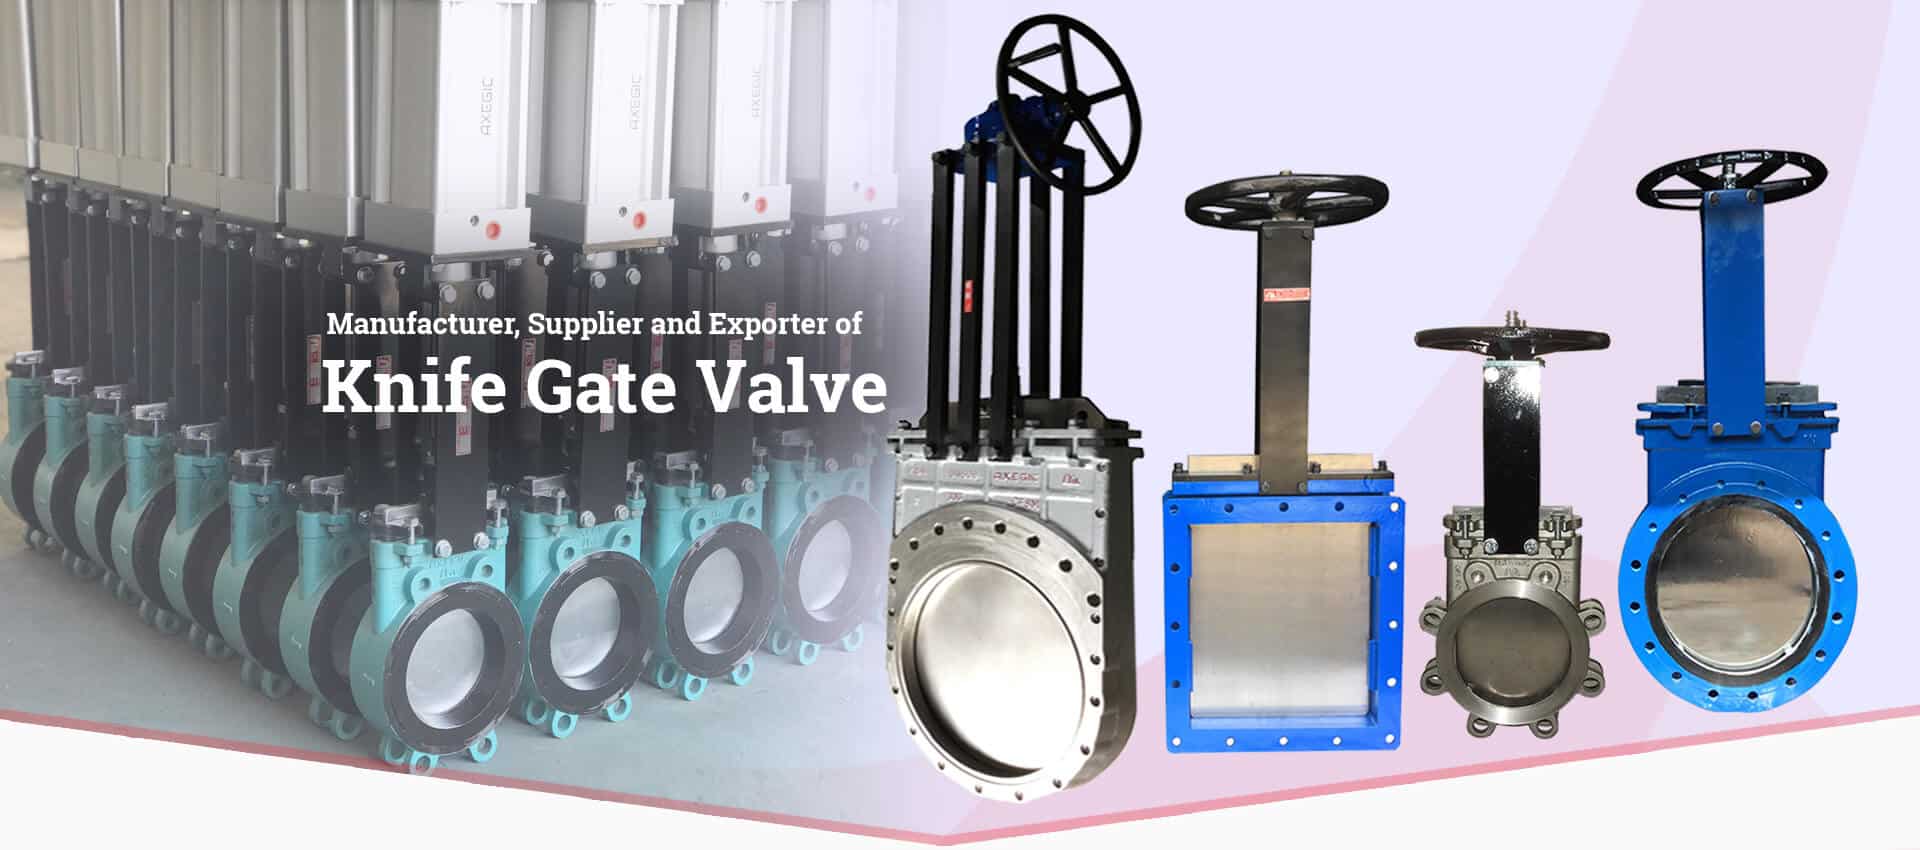 Knife Gate Valve Manufacturer and Exporter In India